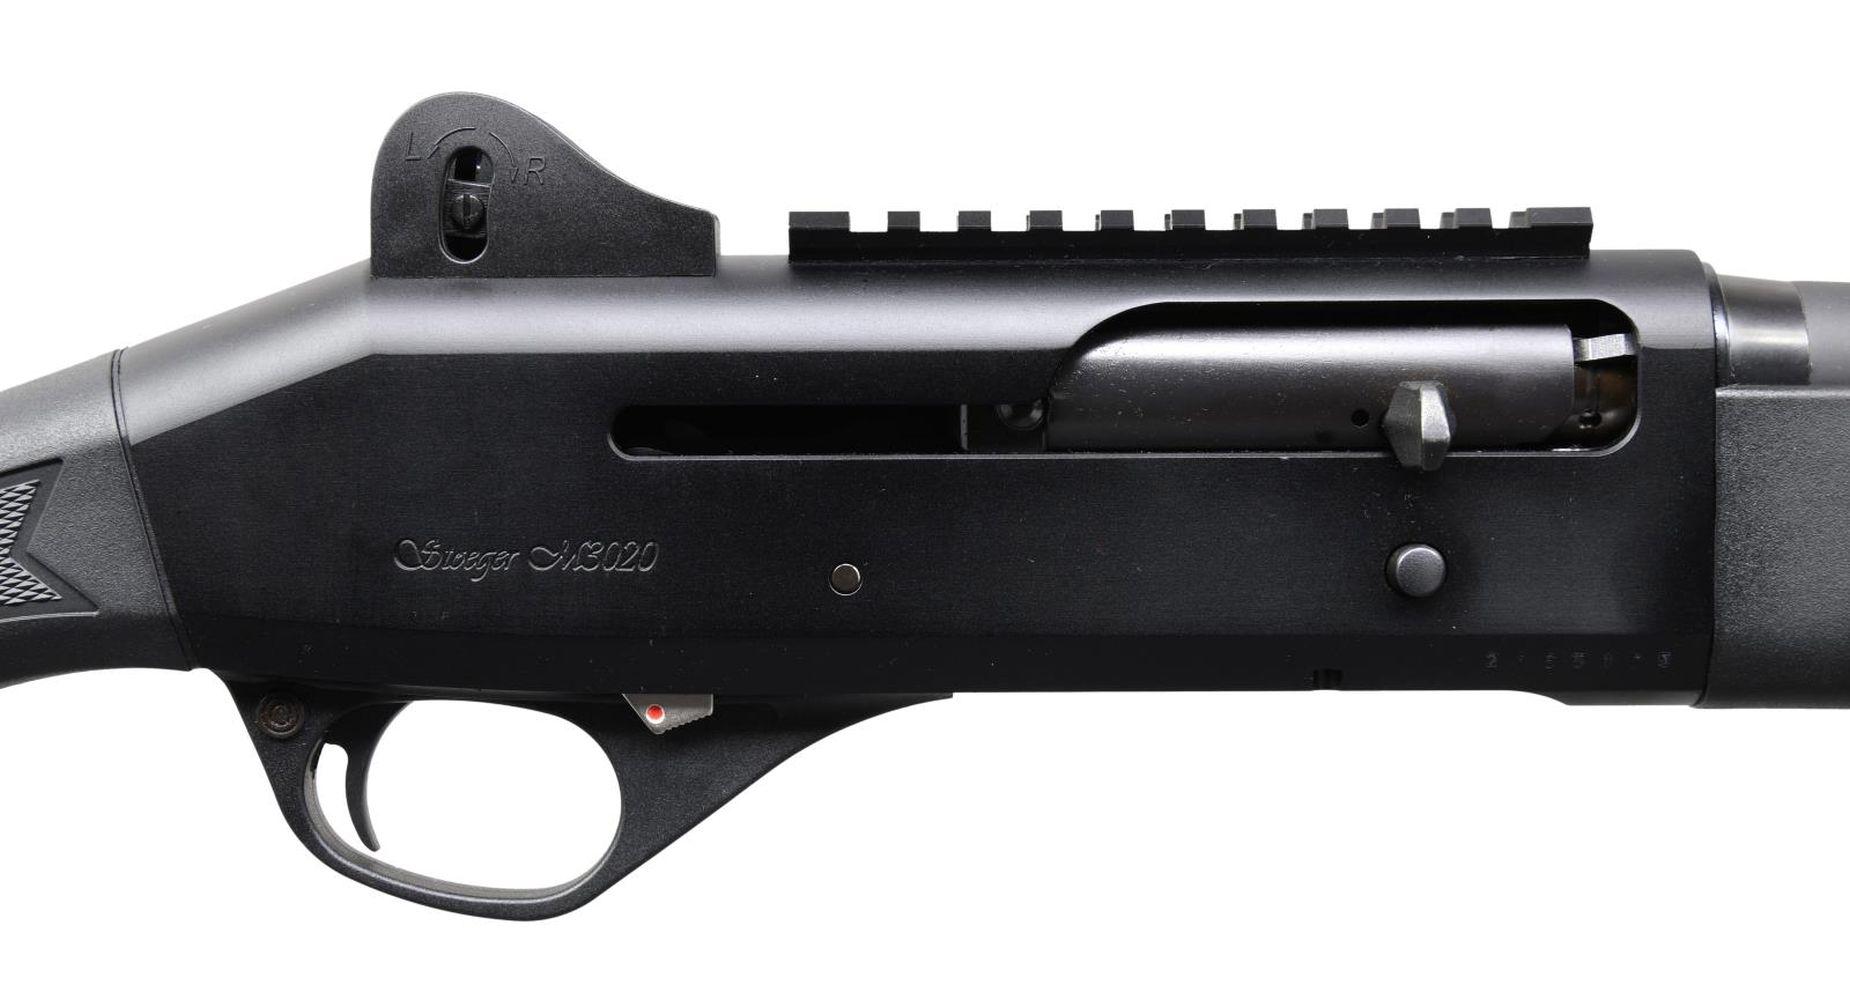 STOEGER M3020 TACTICAL SEMI-AUTOMATIC SHOTGUN WITH